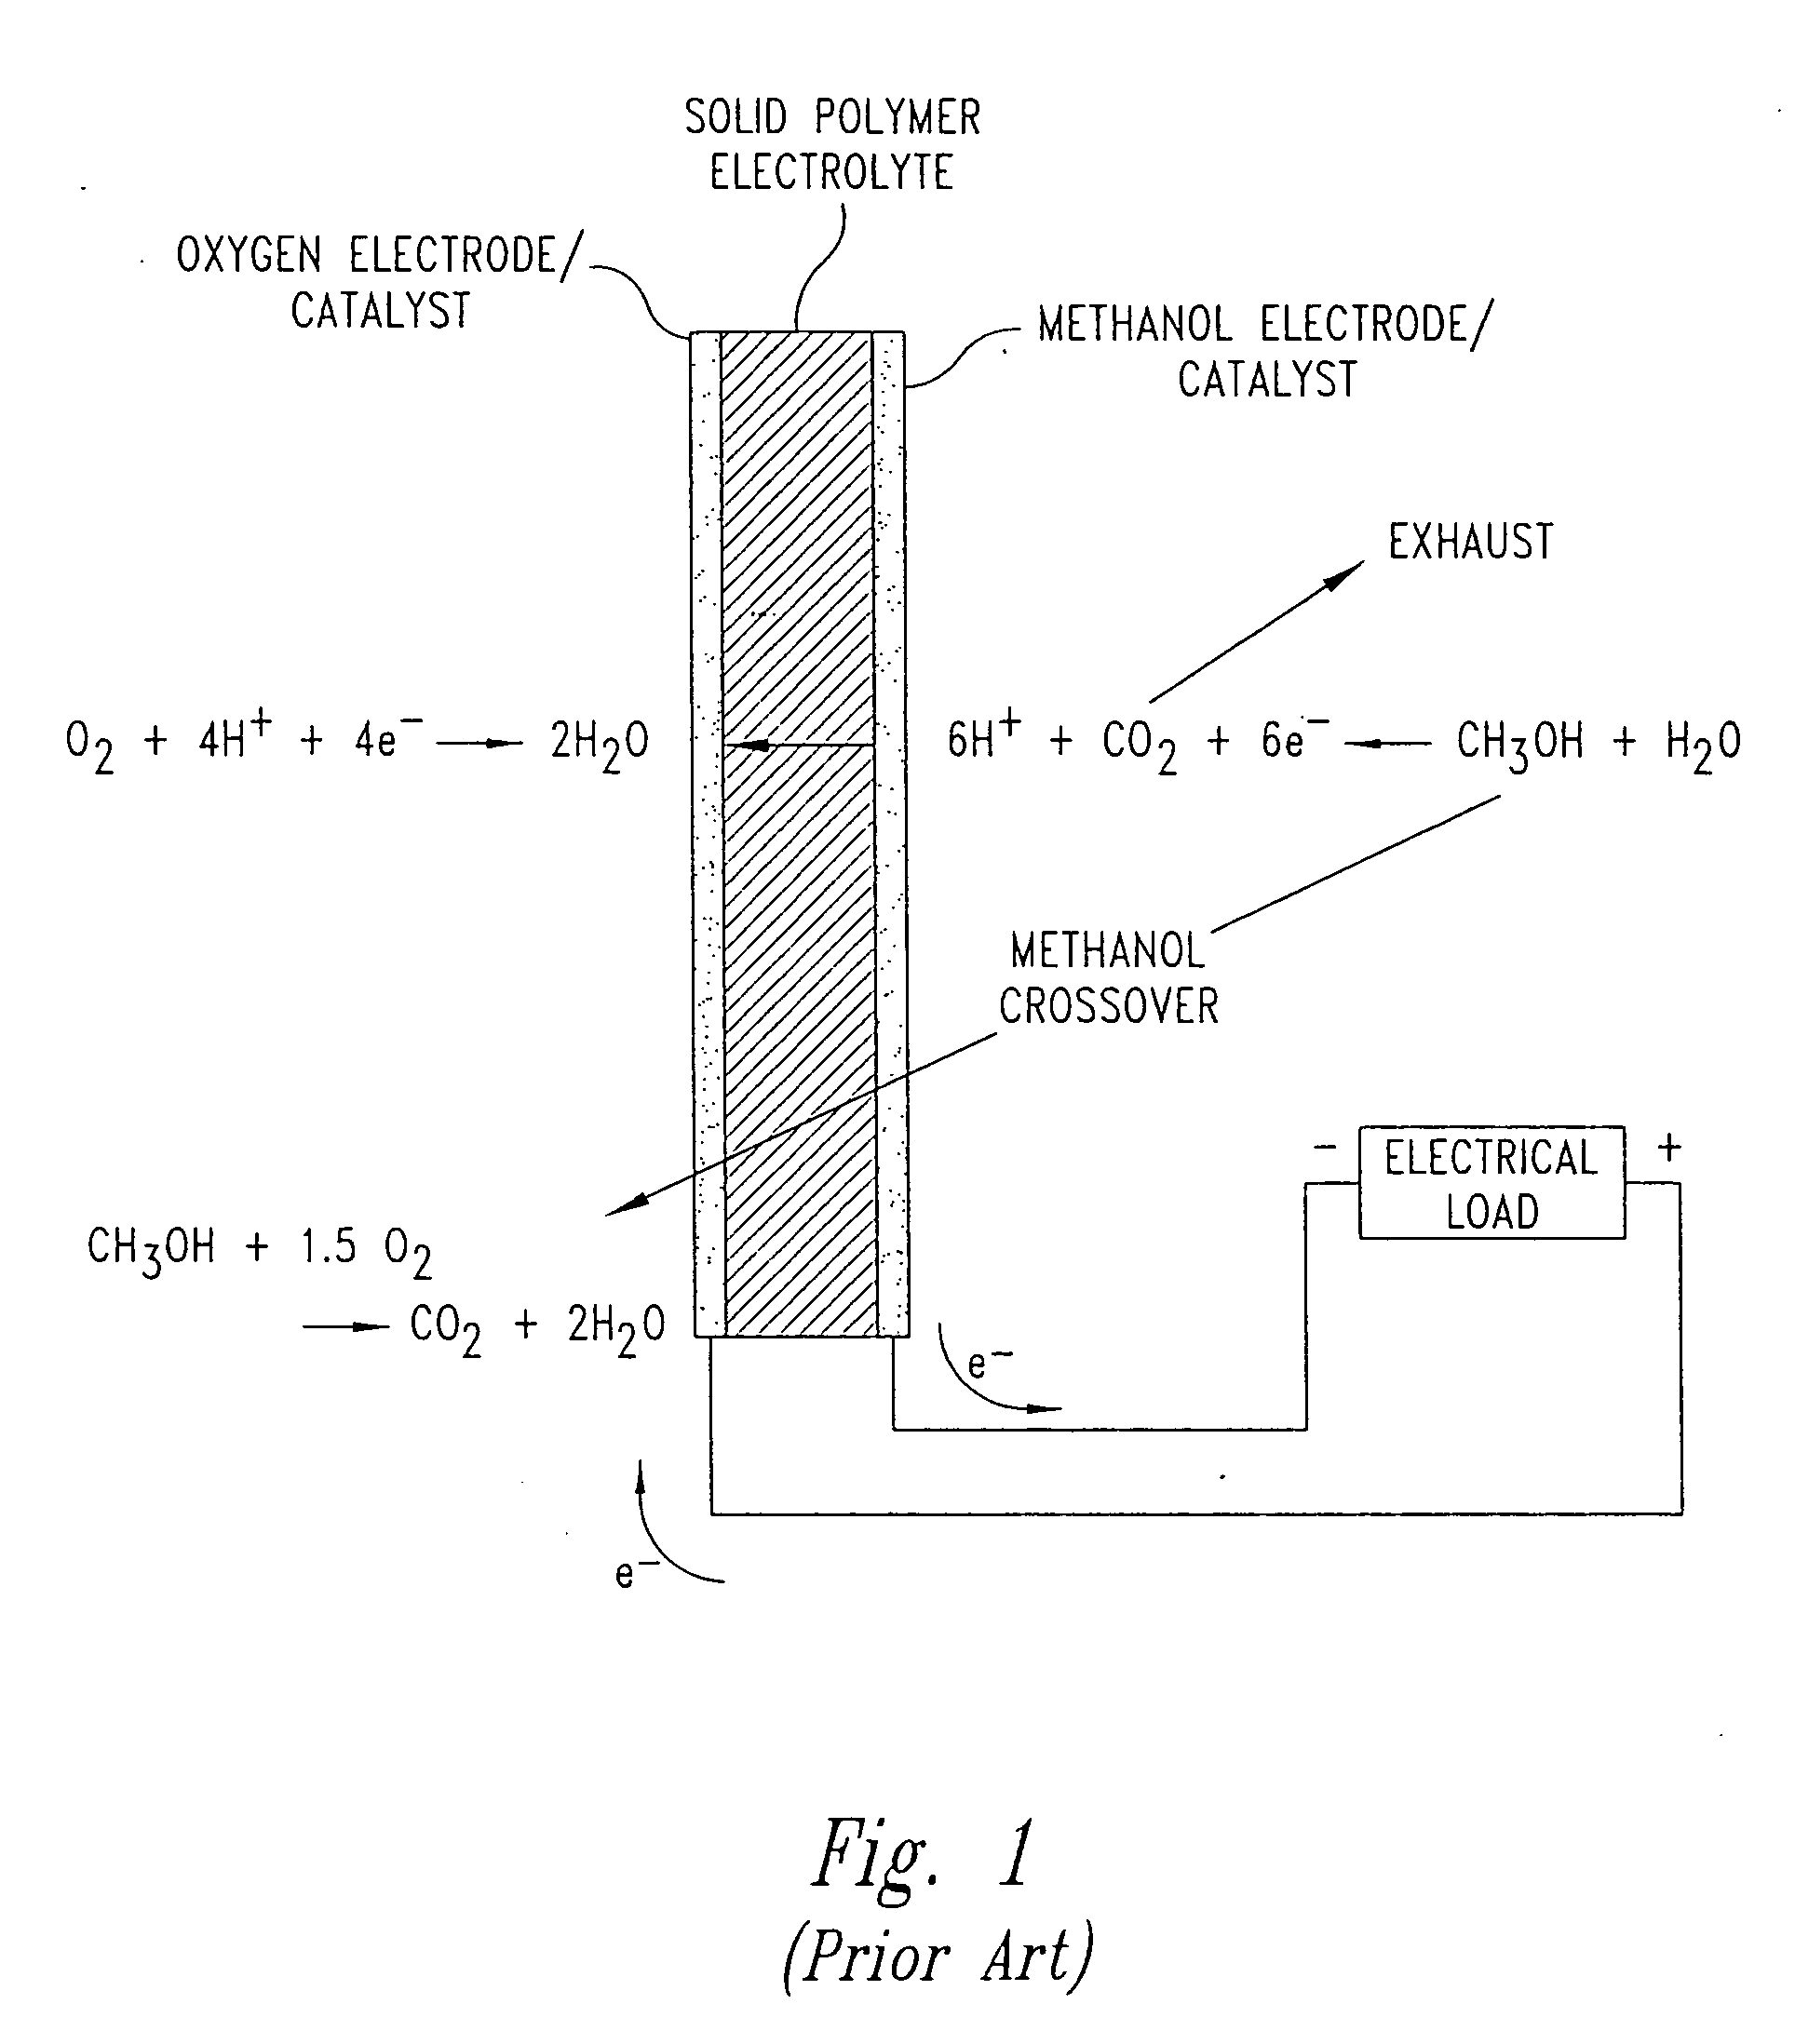 Fuel cells having silicon substrates and/or sol-gel derived support structures